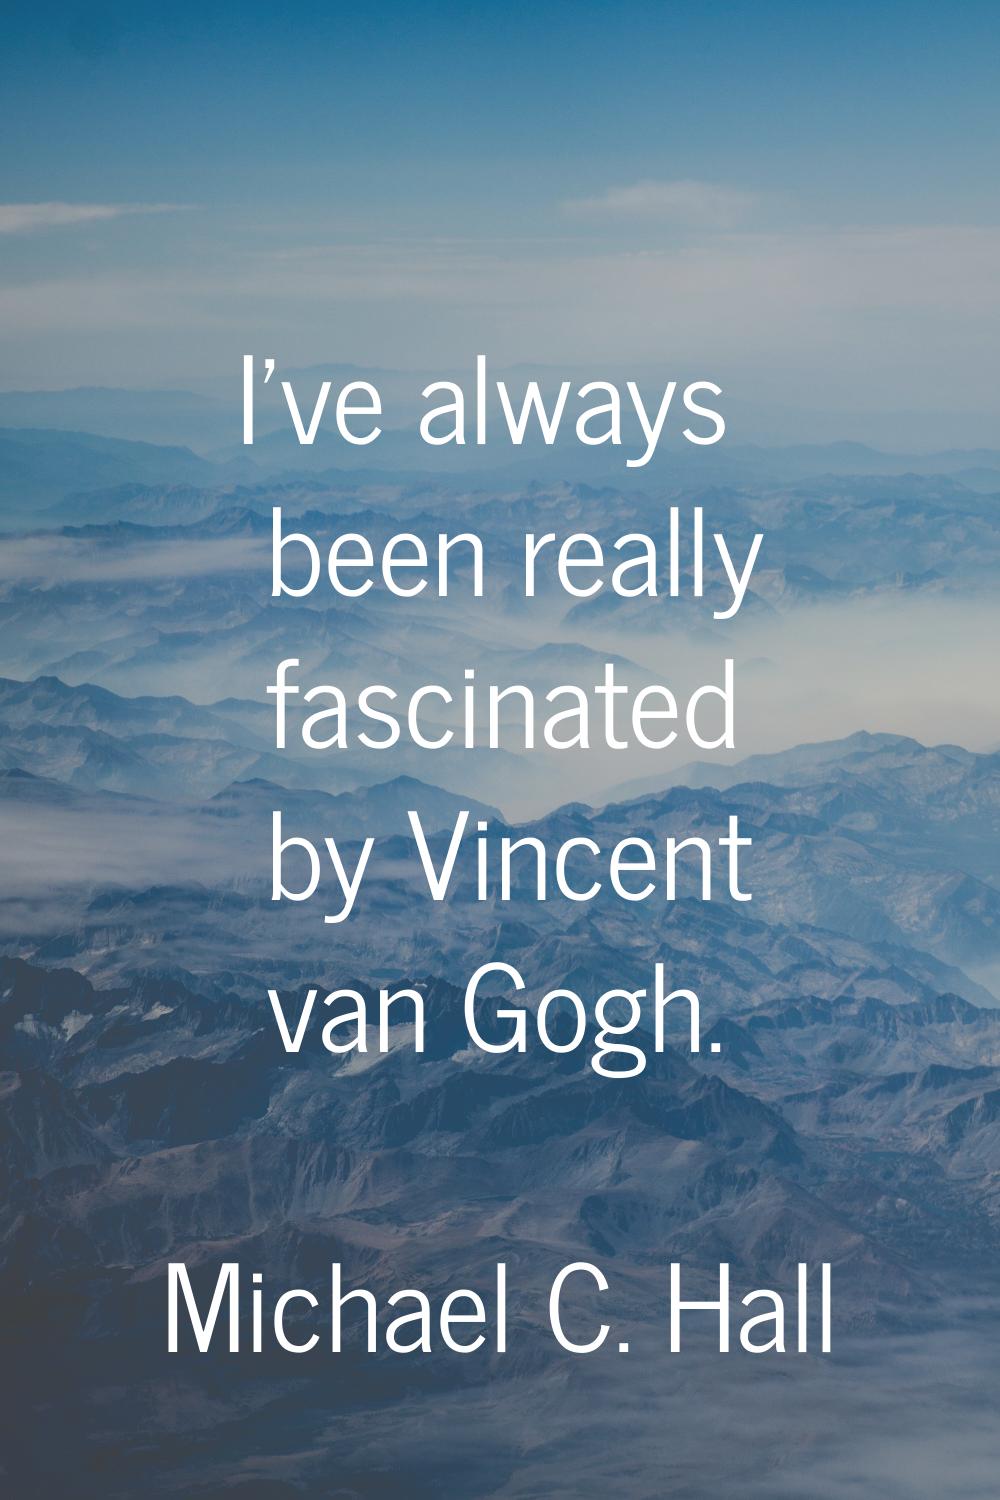 I've always been really fascinated by Vincent van Gogh.